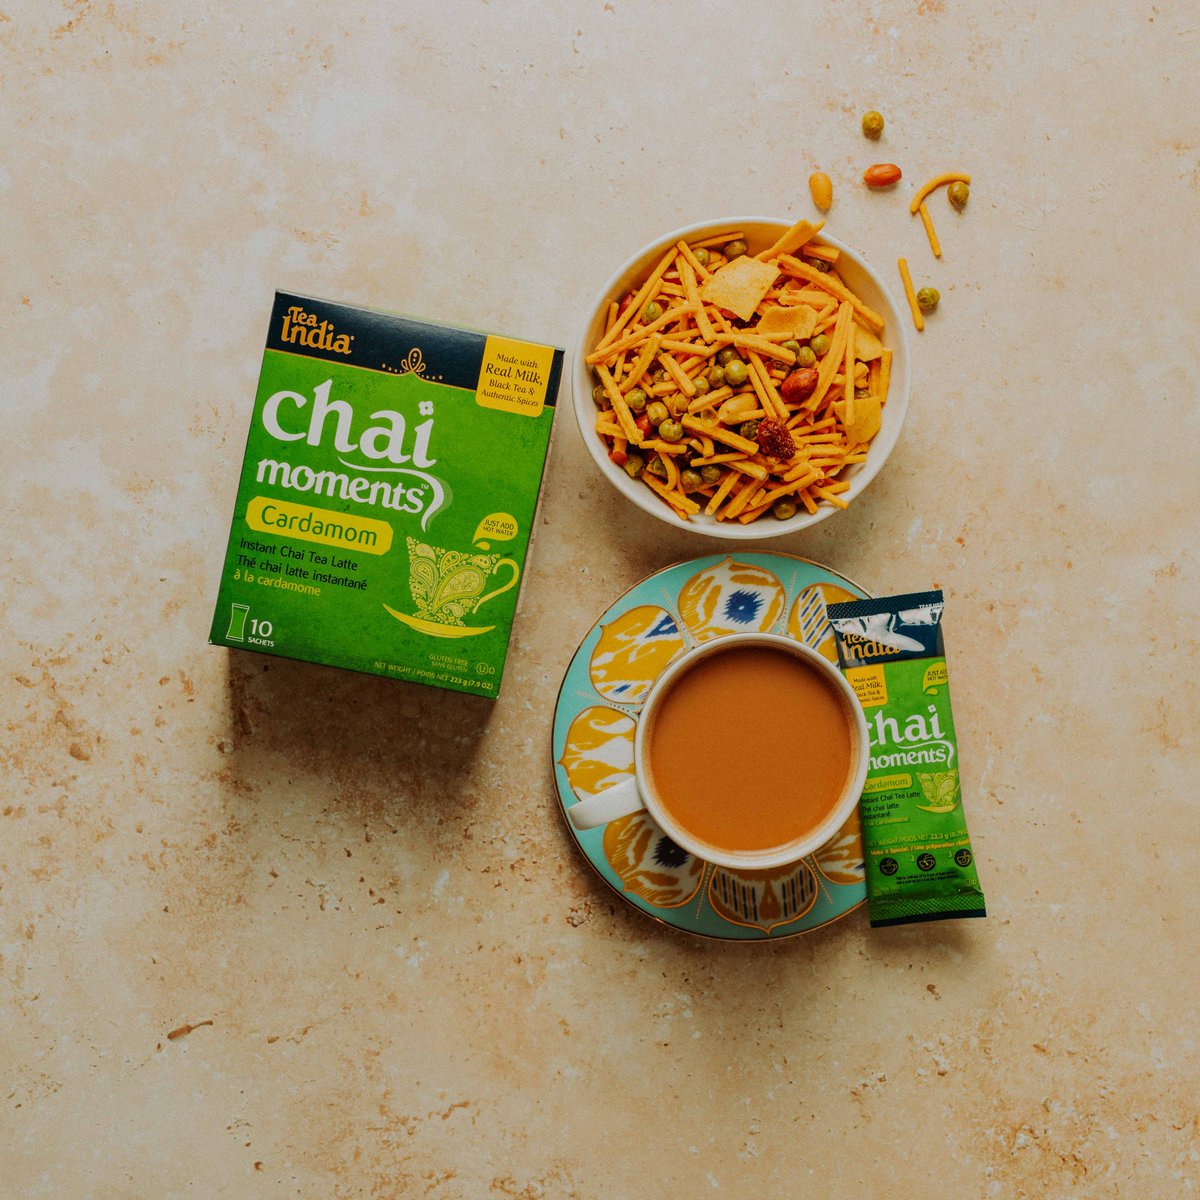 A hot cup of Cardamom Chai makes the perfect evening snack.😋 

.
.
.

#teaindia #indianchai #snacktime #snack #chai #chailover #chaiislove #chailovers #chaitime #goodevening #vibe #canada #canadaindians #chaibiscuit #chaibisket